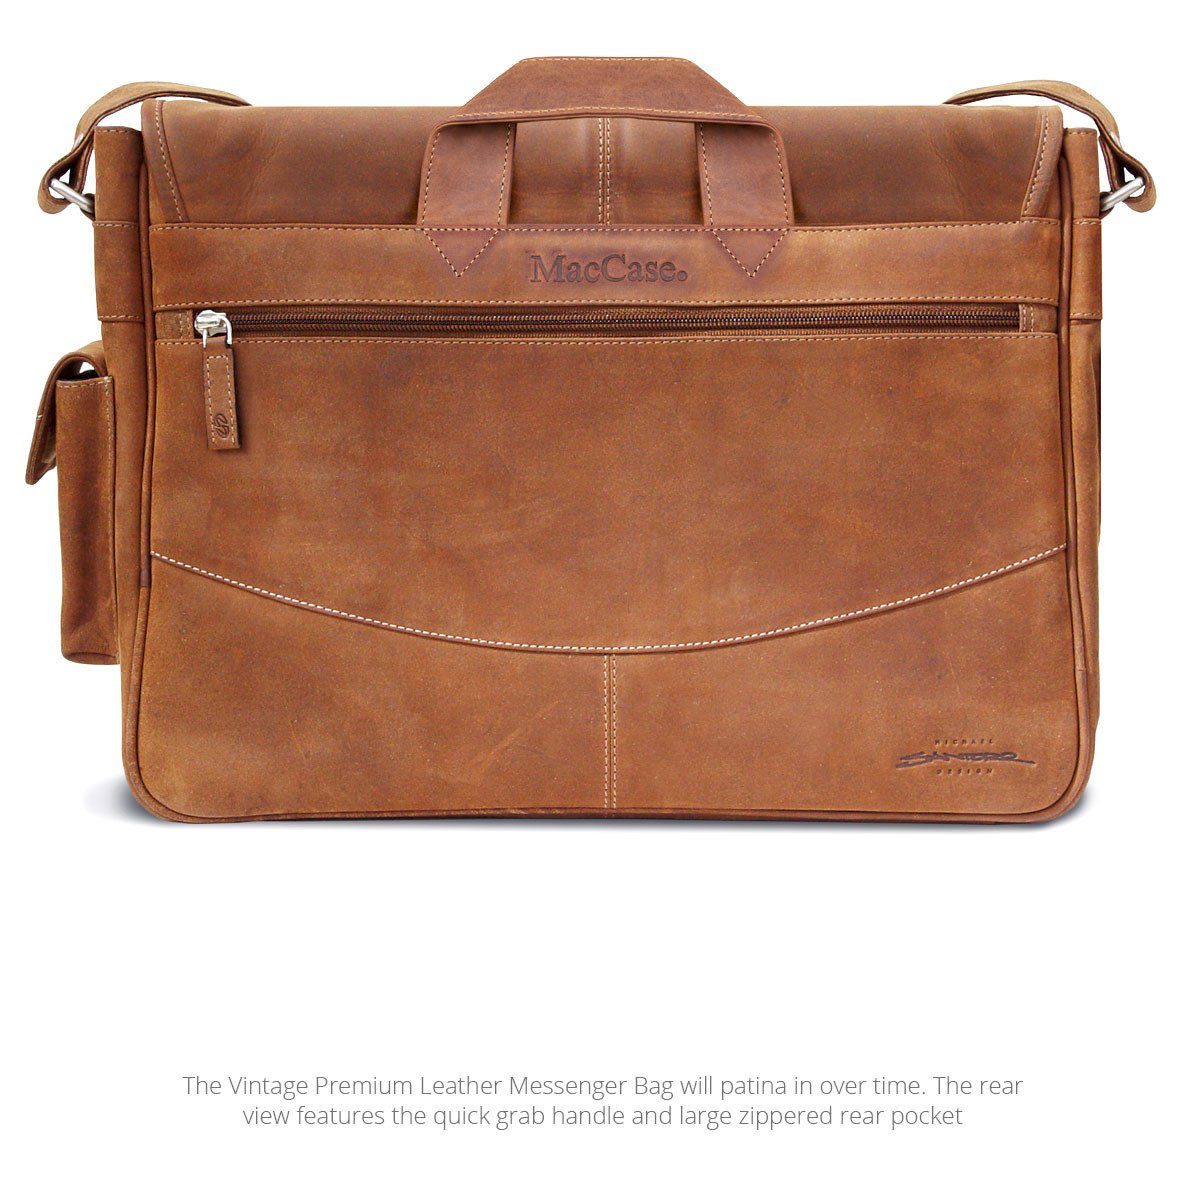 The Innovative Universal Messenger Bags by MacCase